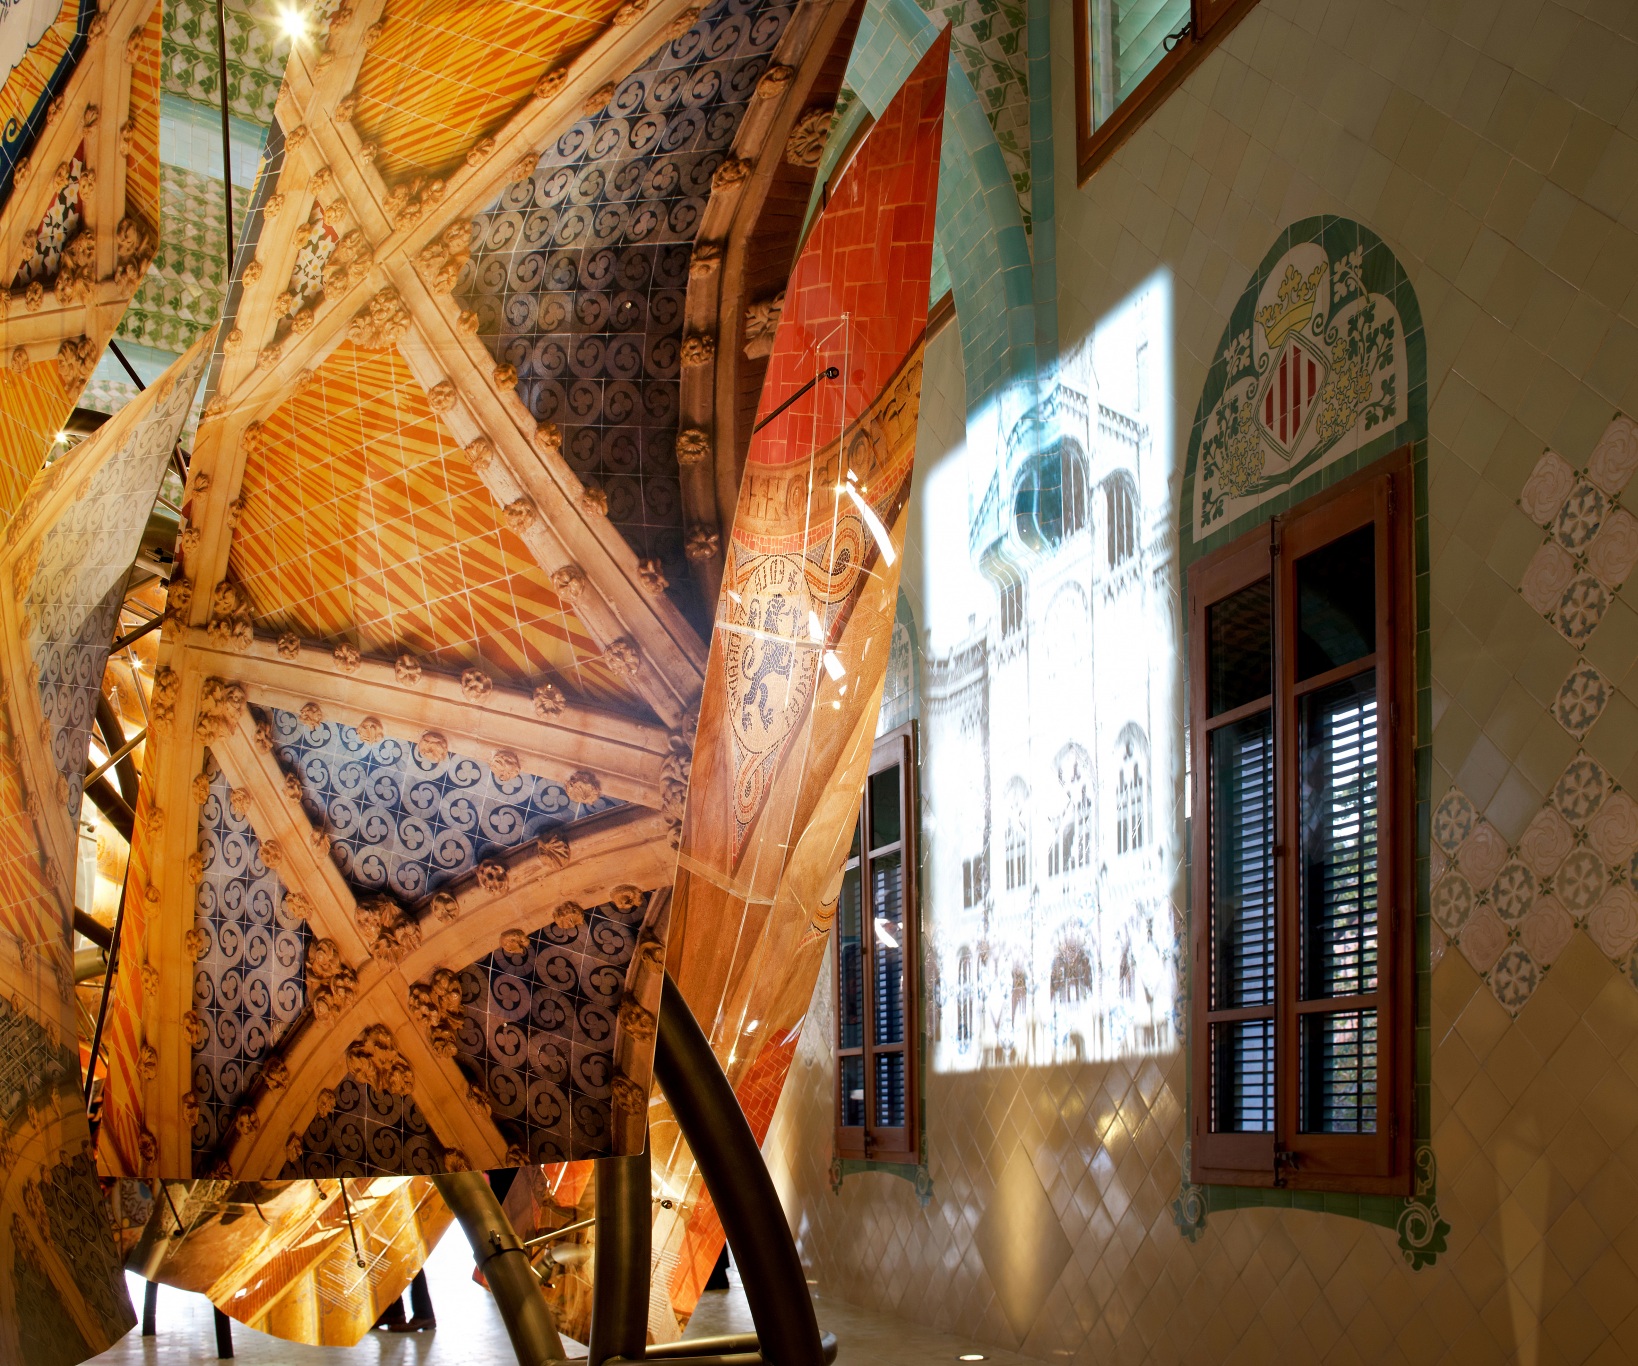 Hospital of the Santa Creu i Sant Pau. Illuminated dragon made of architectonic elements by Domènech i Montaner. Projection on the wall and window.